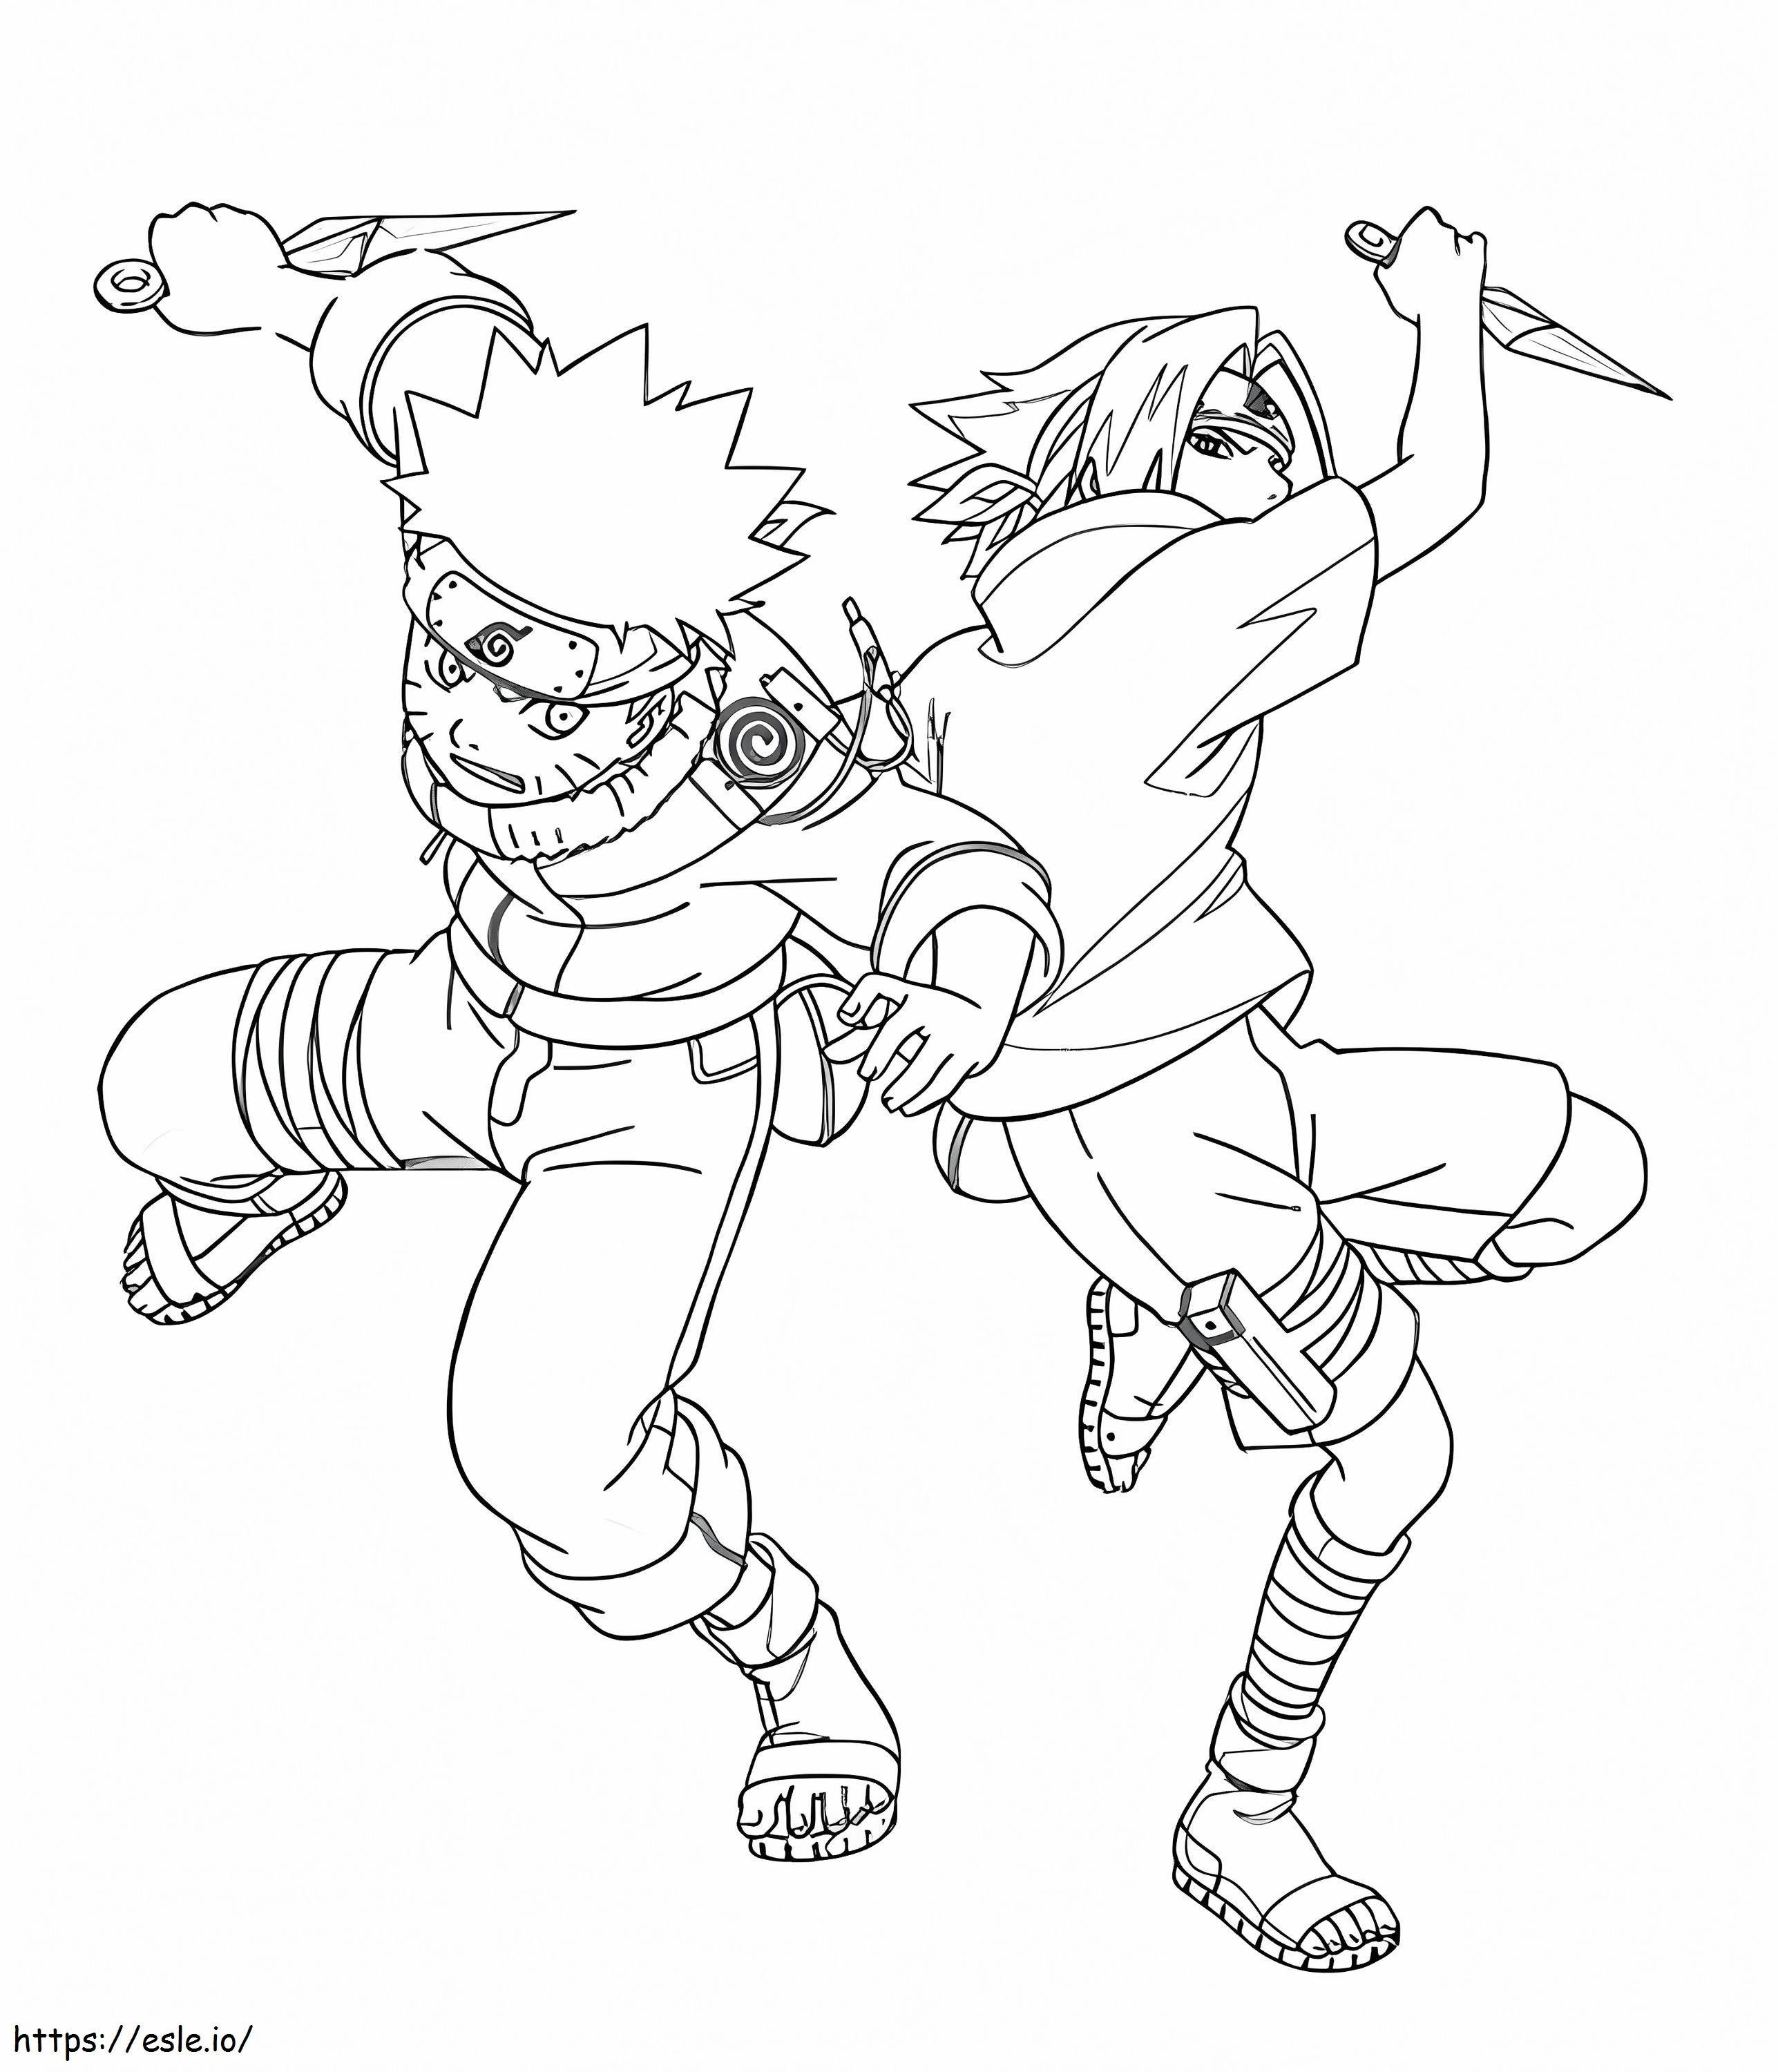 Fight Between Little Sasuke And Naruto coloring page